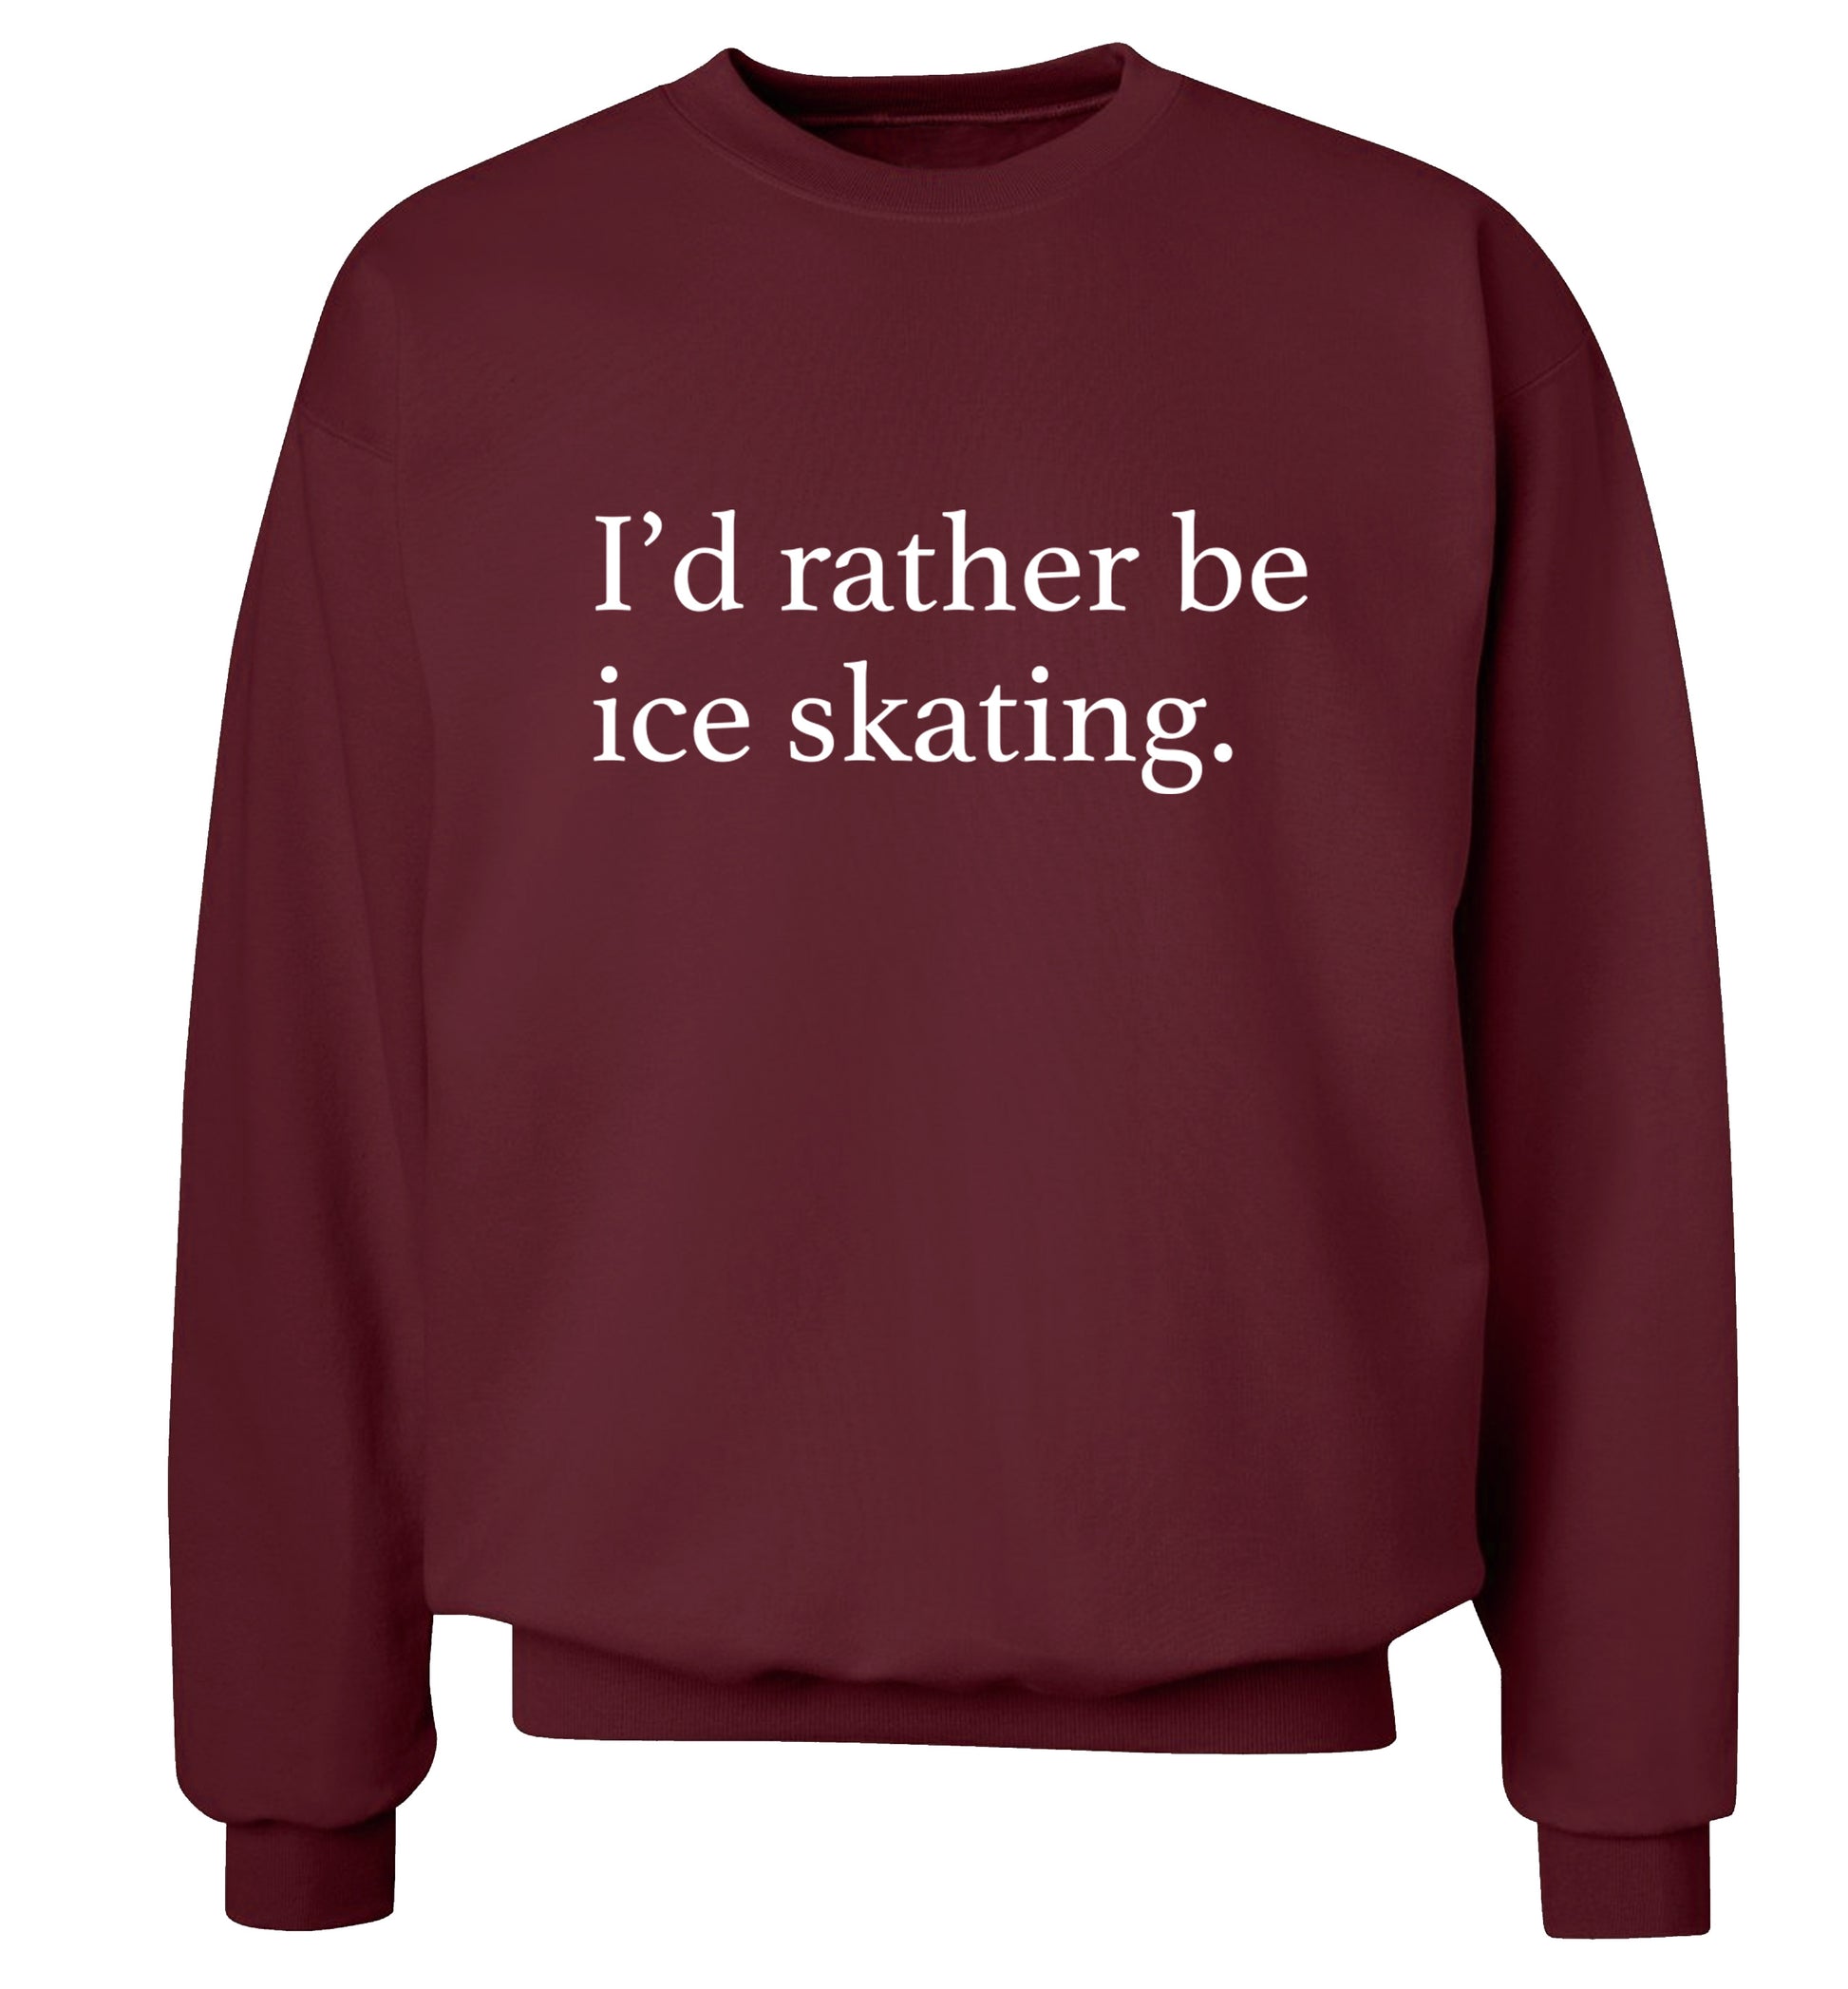 I'd rather be ice skating Adult's unisexmaroon Sweater 2XL